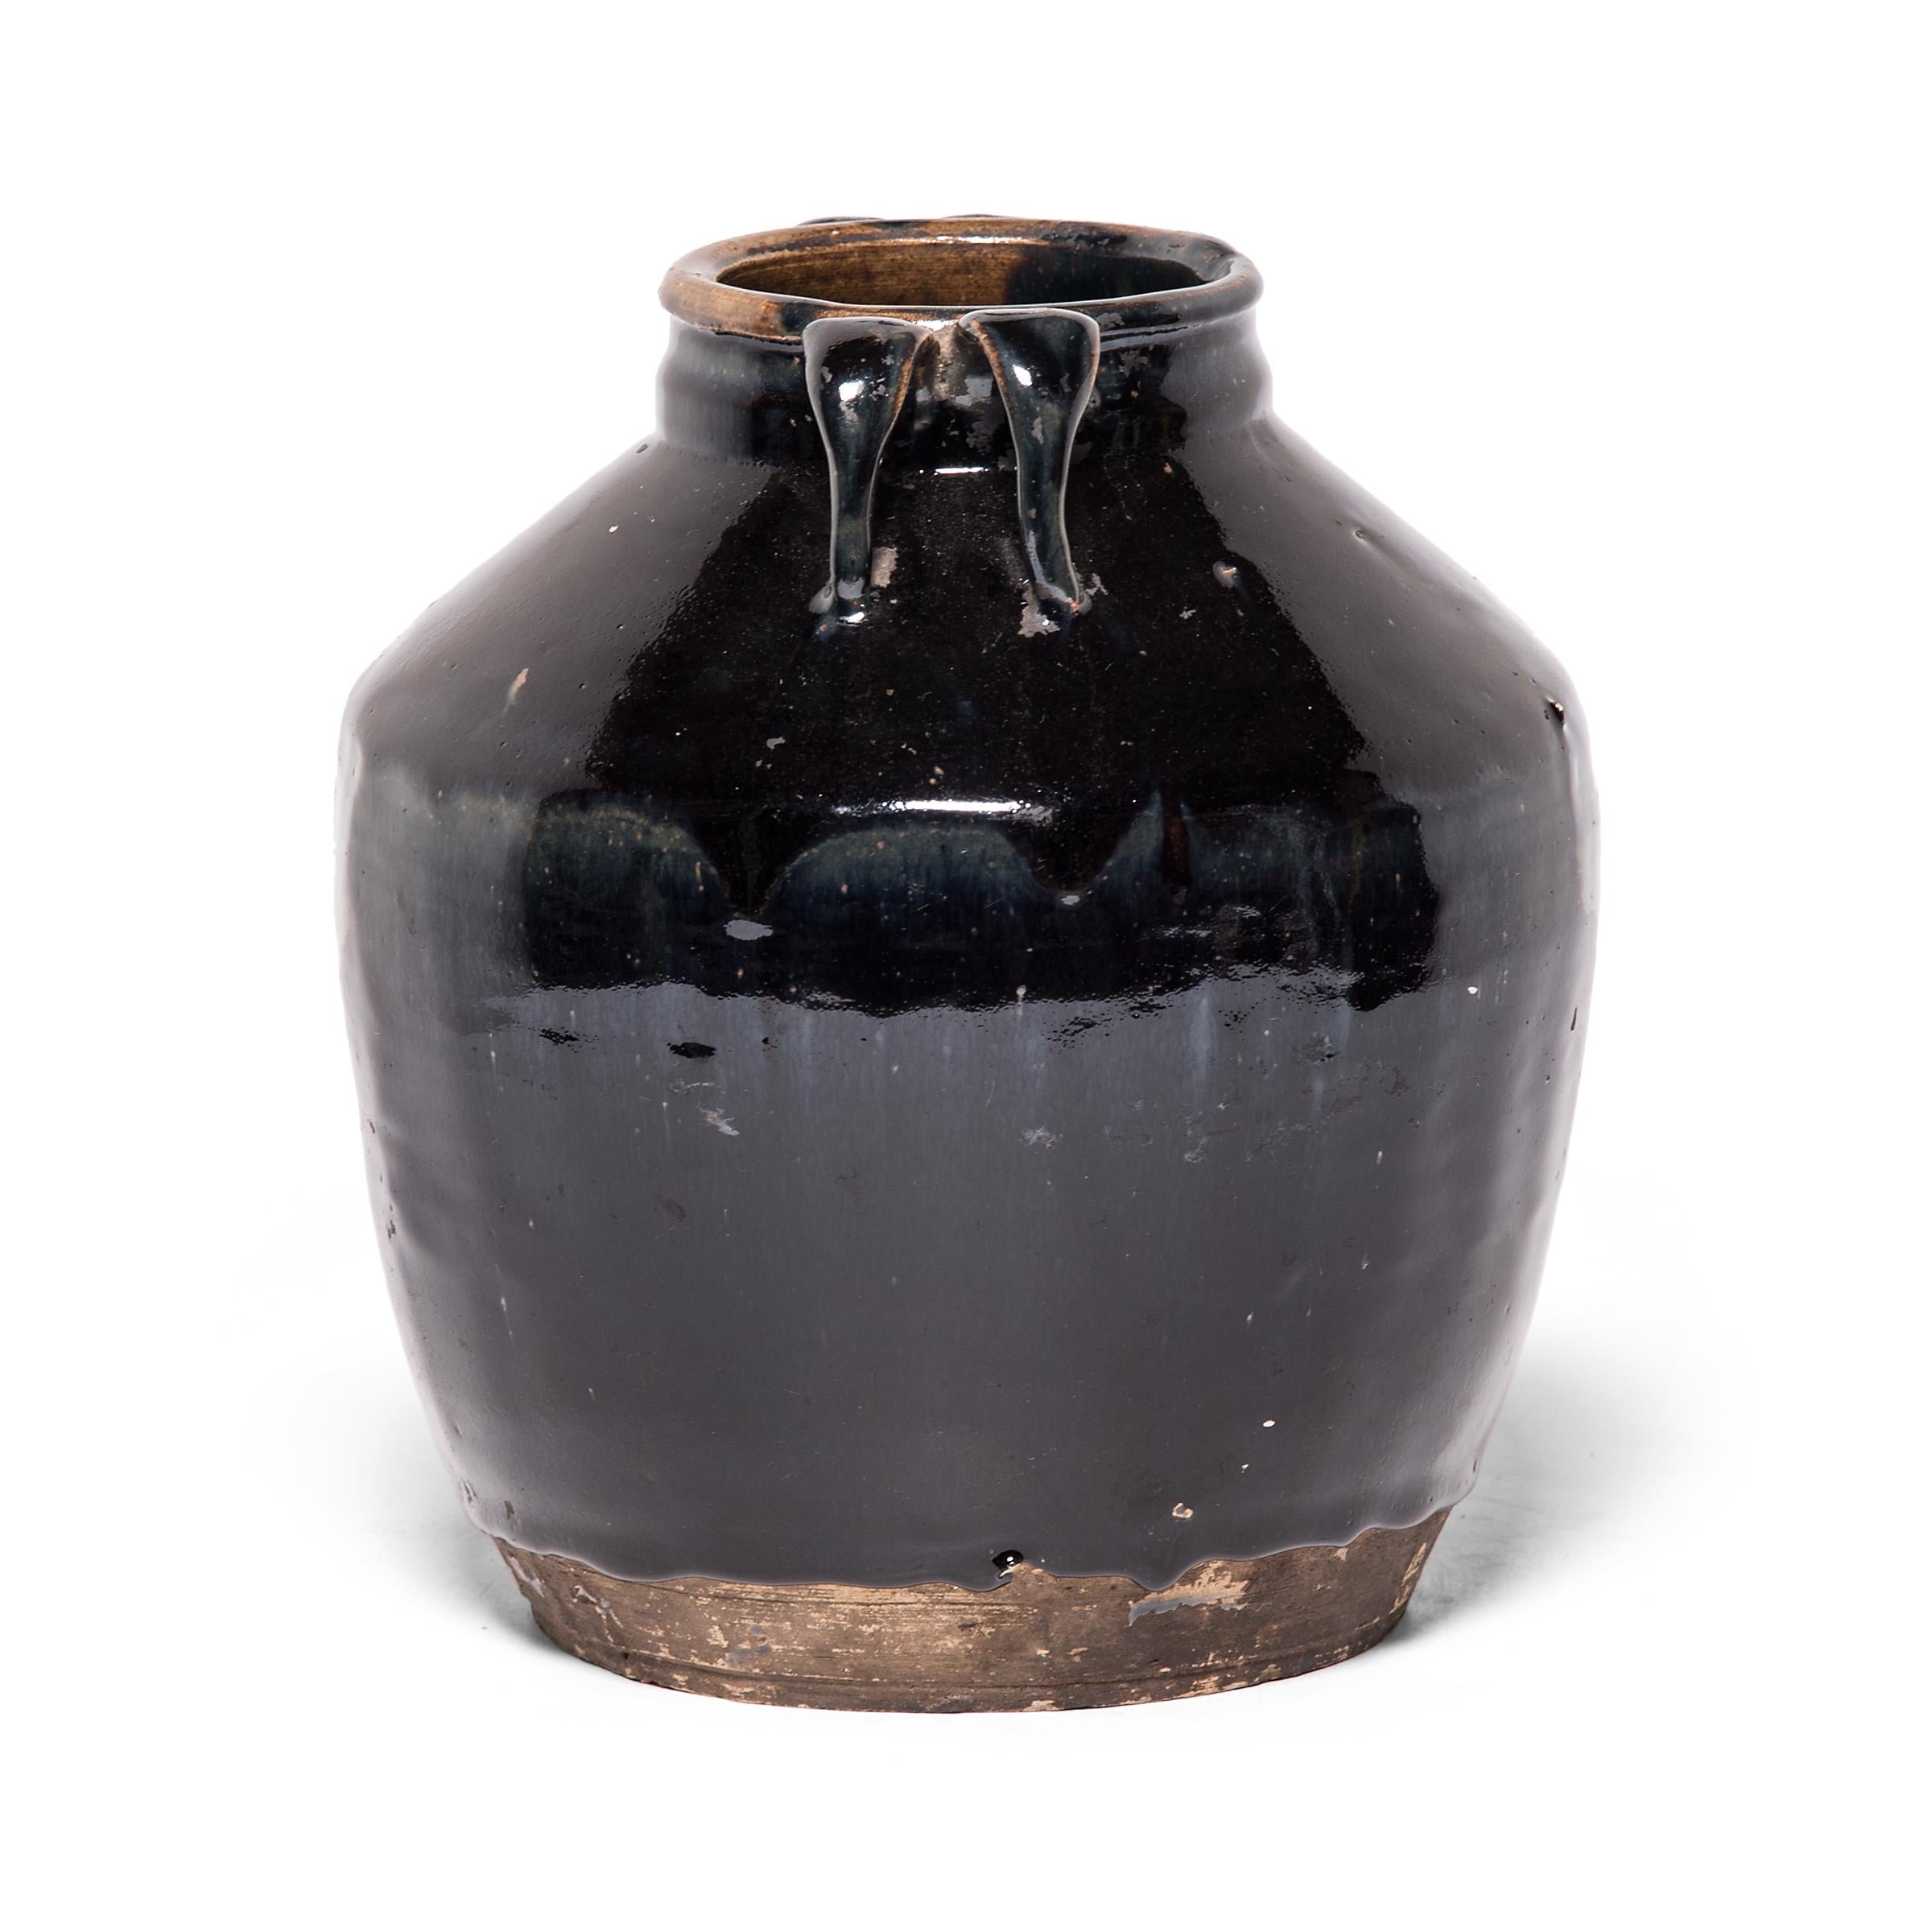 As though slicked with oil, a thick blue-black glaze spills over the high shoulders and arched strap handles of this tapered kitchen vessel. The 19th century ceramic jar was once used to prepare and store soy sauce in a Qing-dynasty kitchen, as